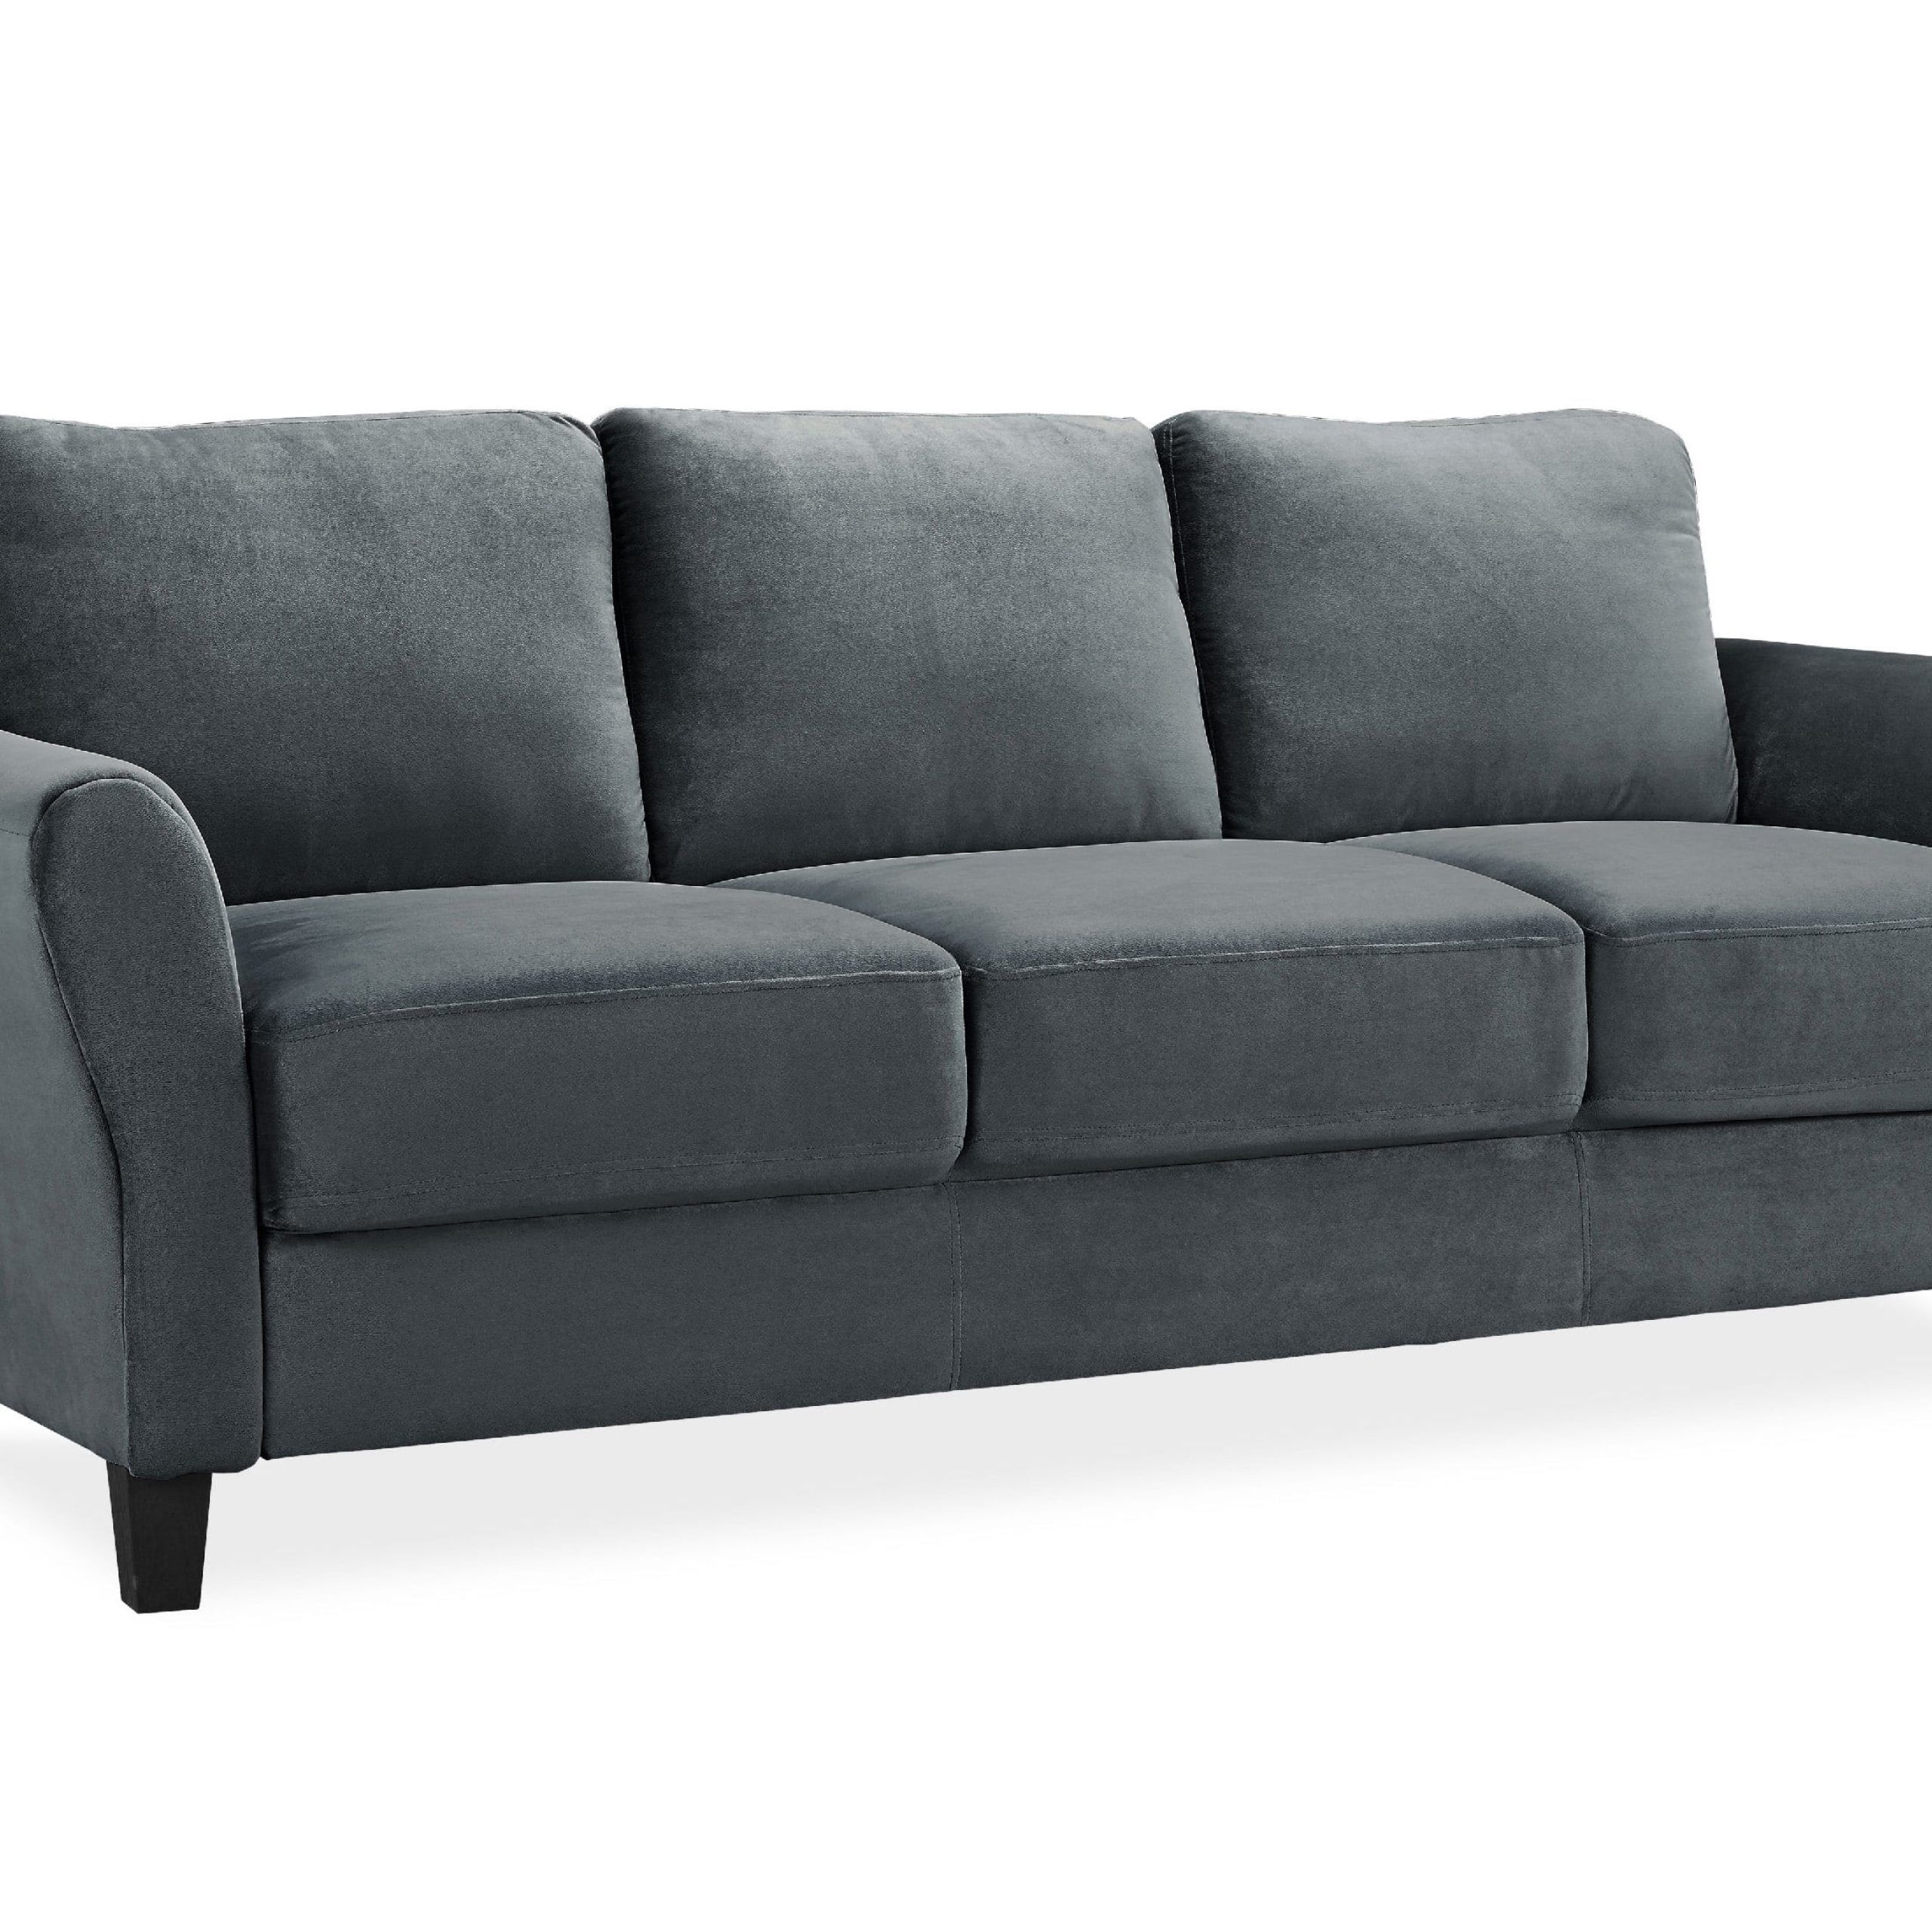 Lifestyle Solutions Alexa Sofa With Curved Arms, Gray Fabric – Walmart Intended For Sofas With Curved Arms (View 6 of 15)